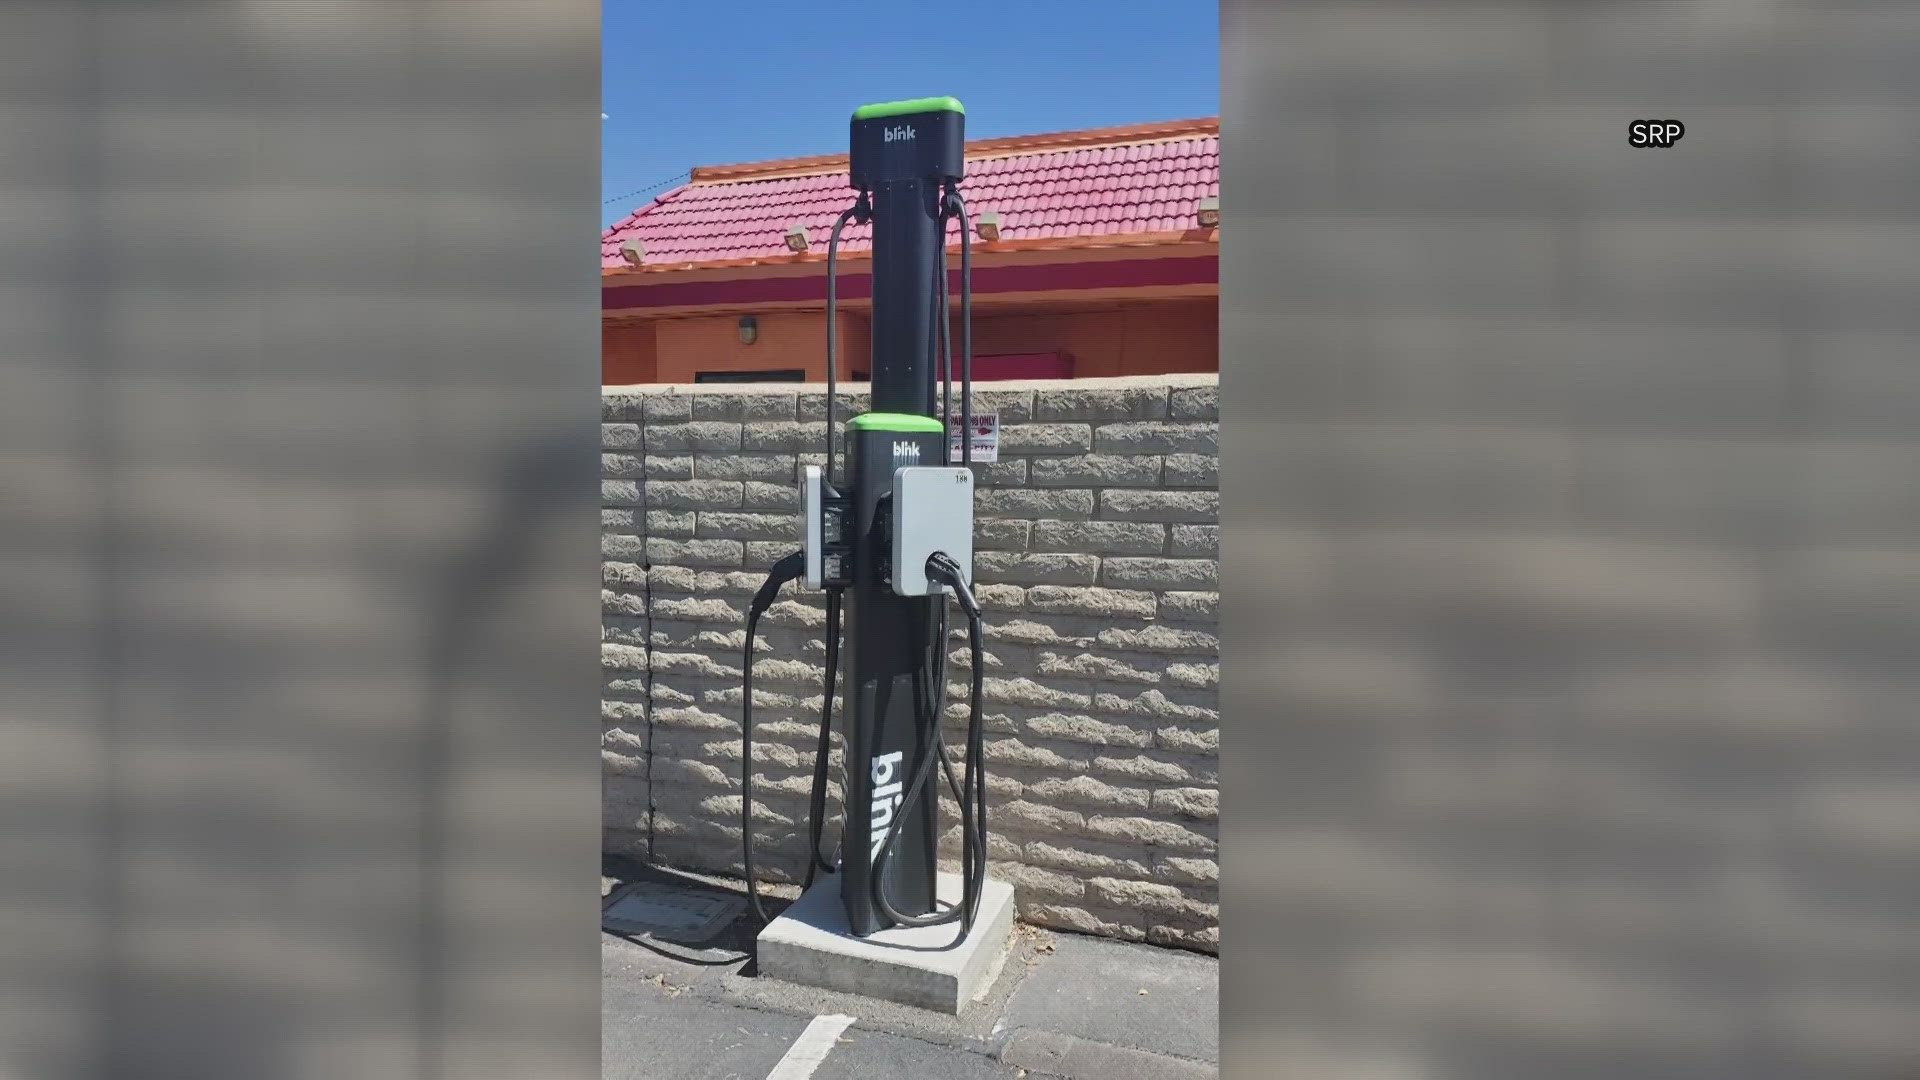 If you drive an electric vehicle, your Valley charging options will get a bit bigger. Phoenix public libraries will soon have EV charging at select locations.